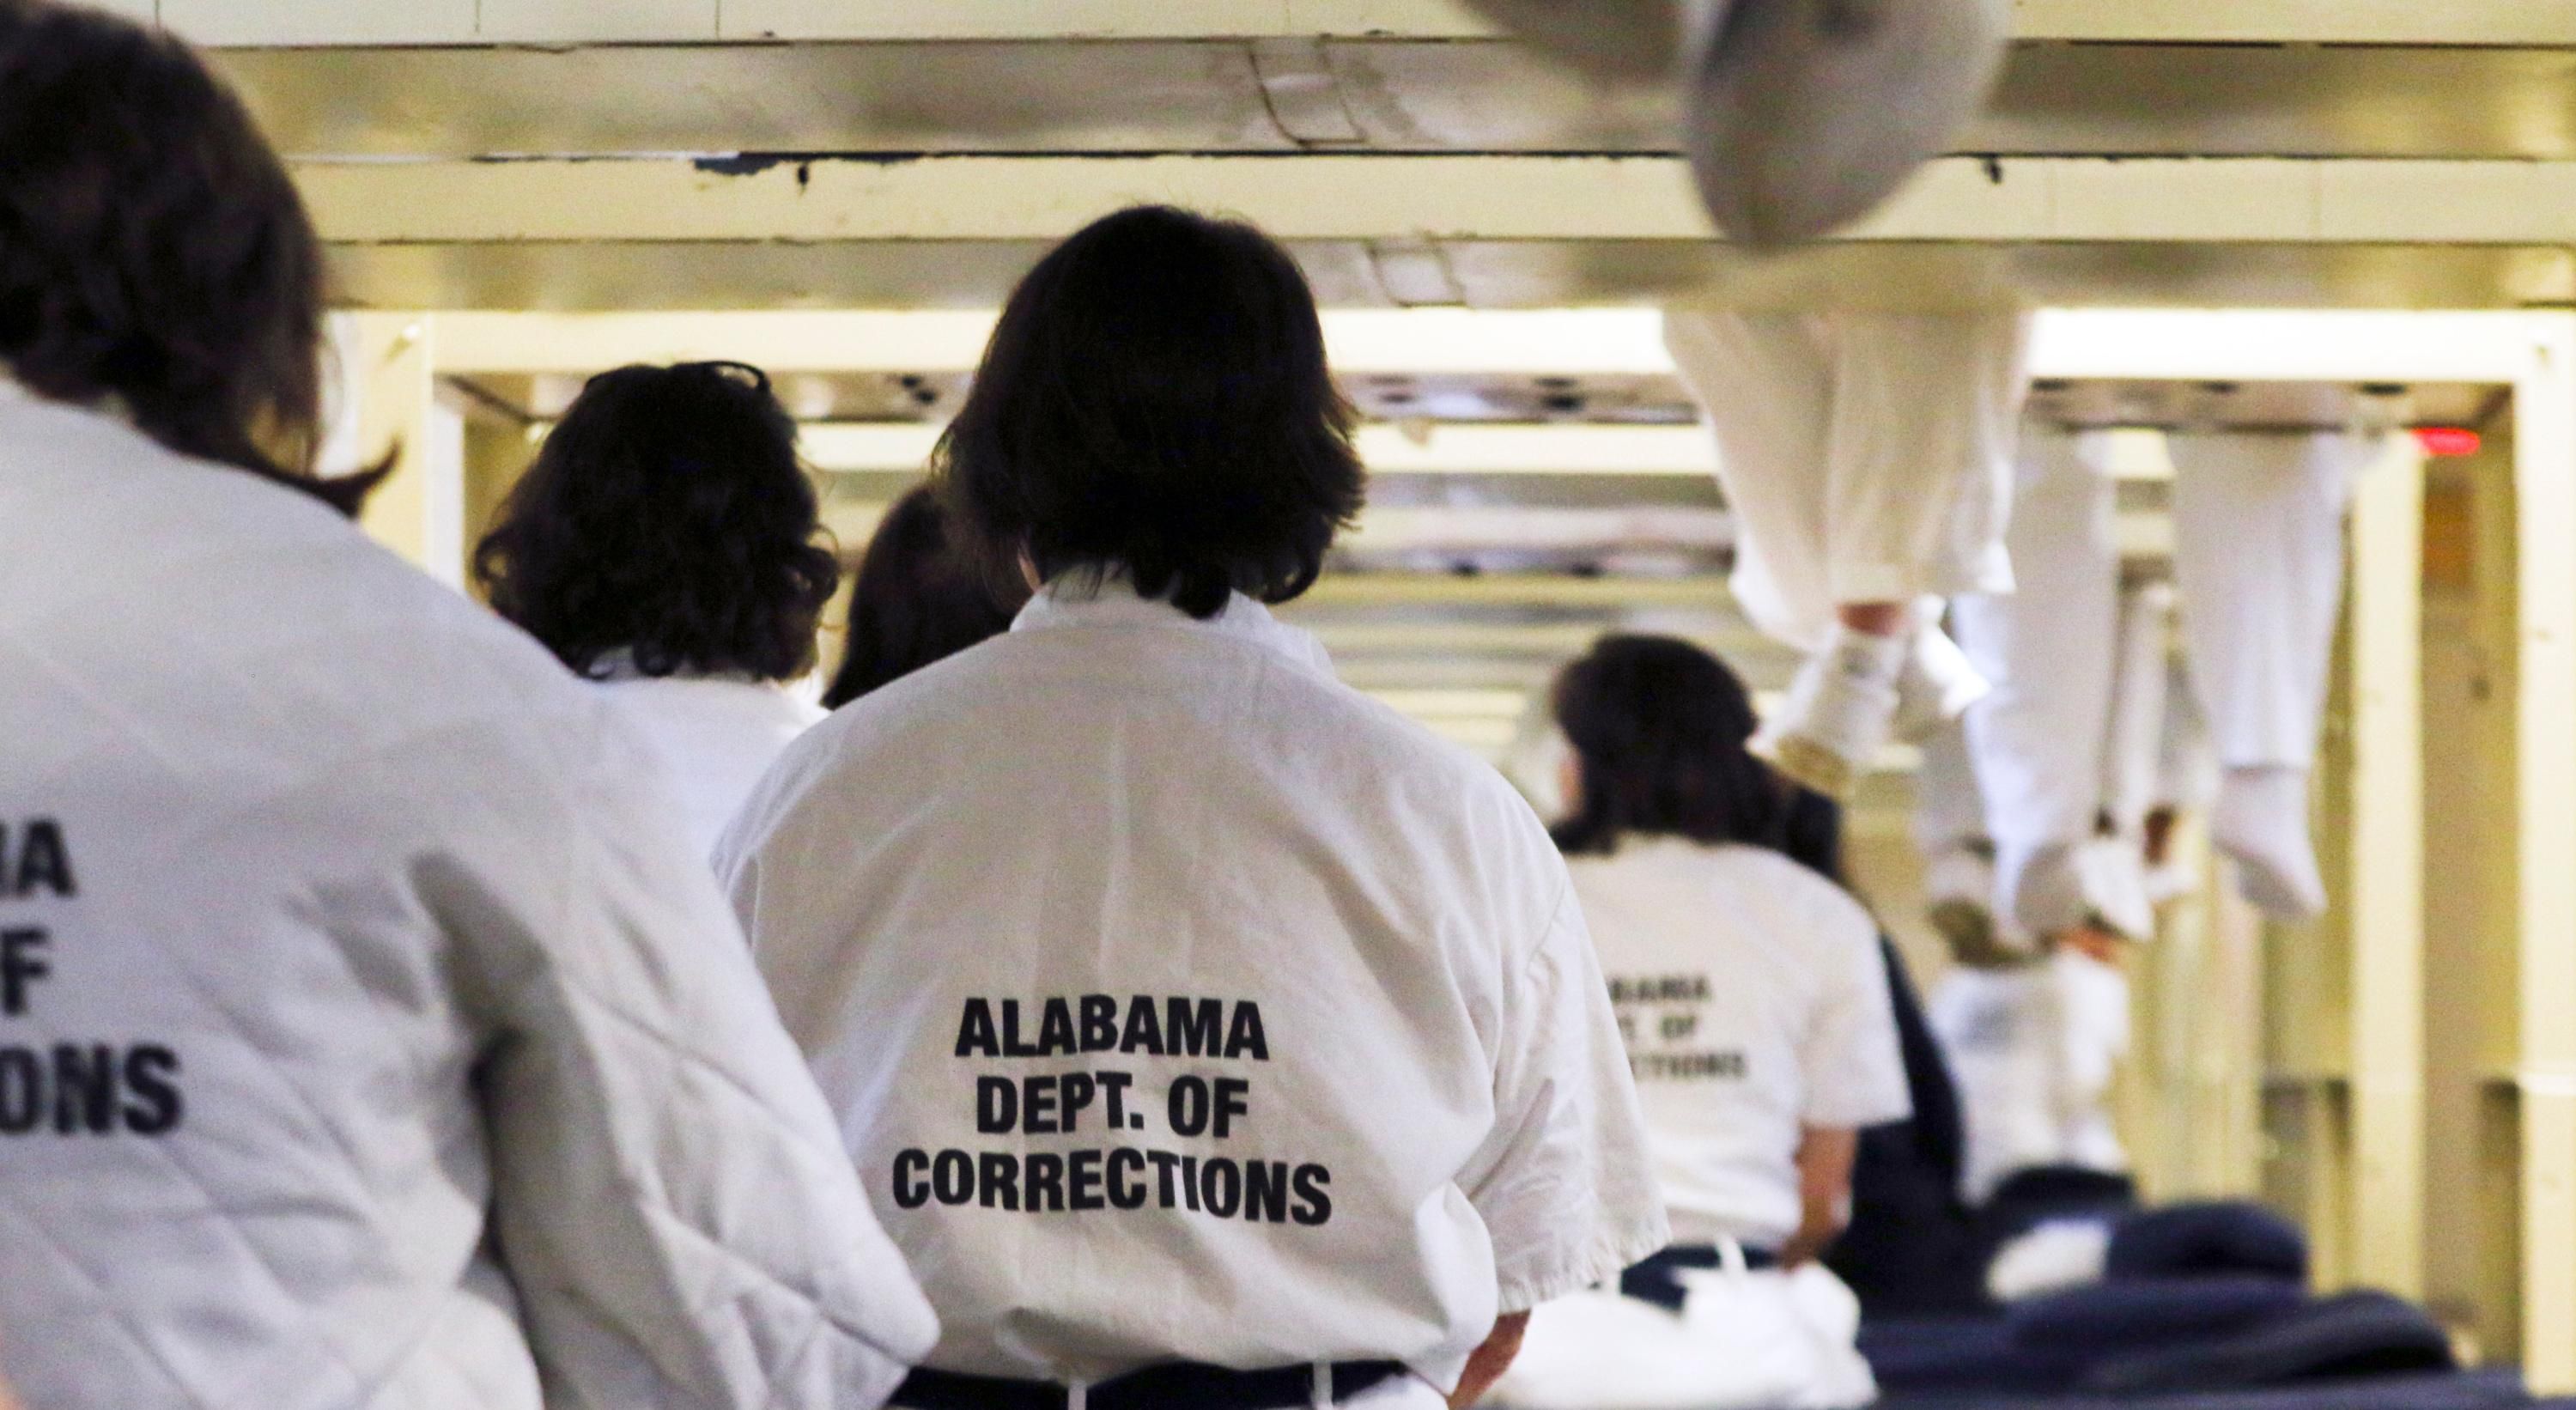 Inmates at a prison in Alabama